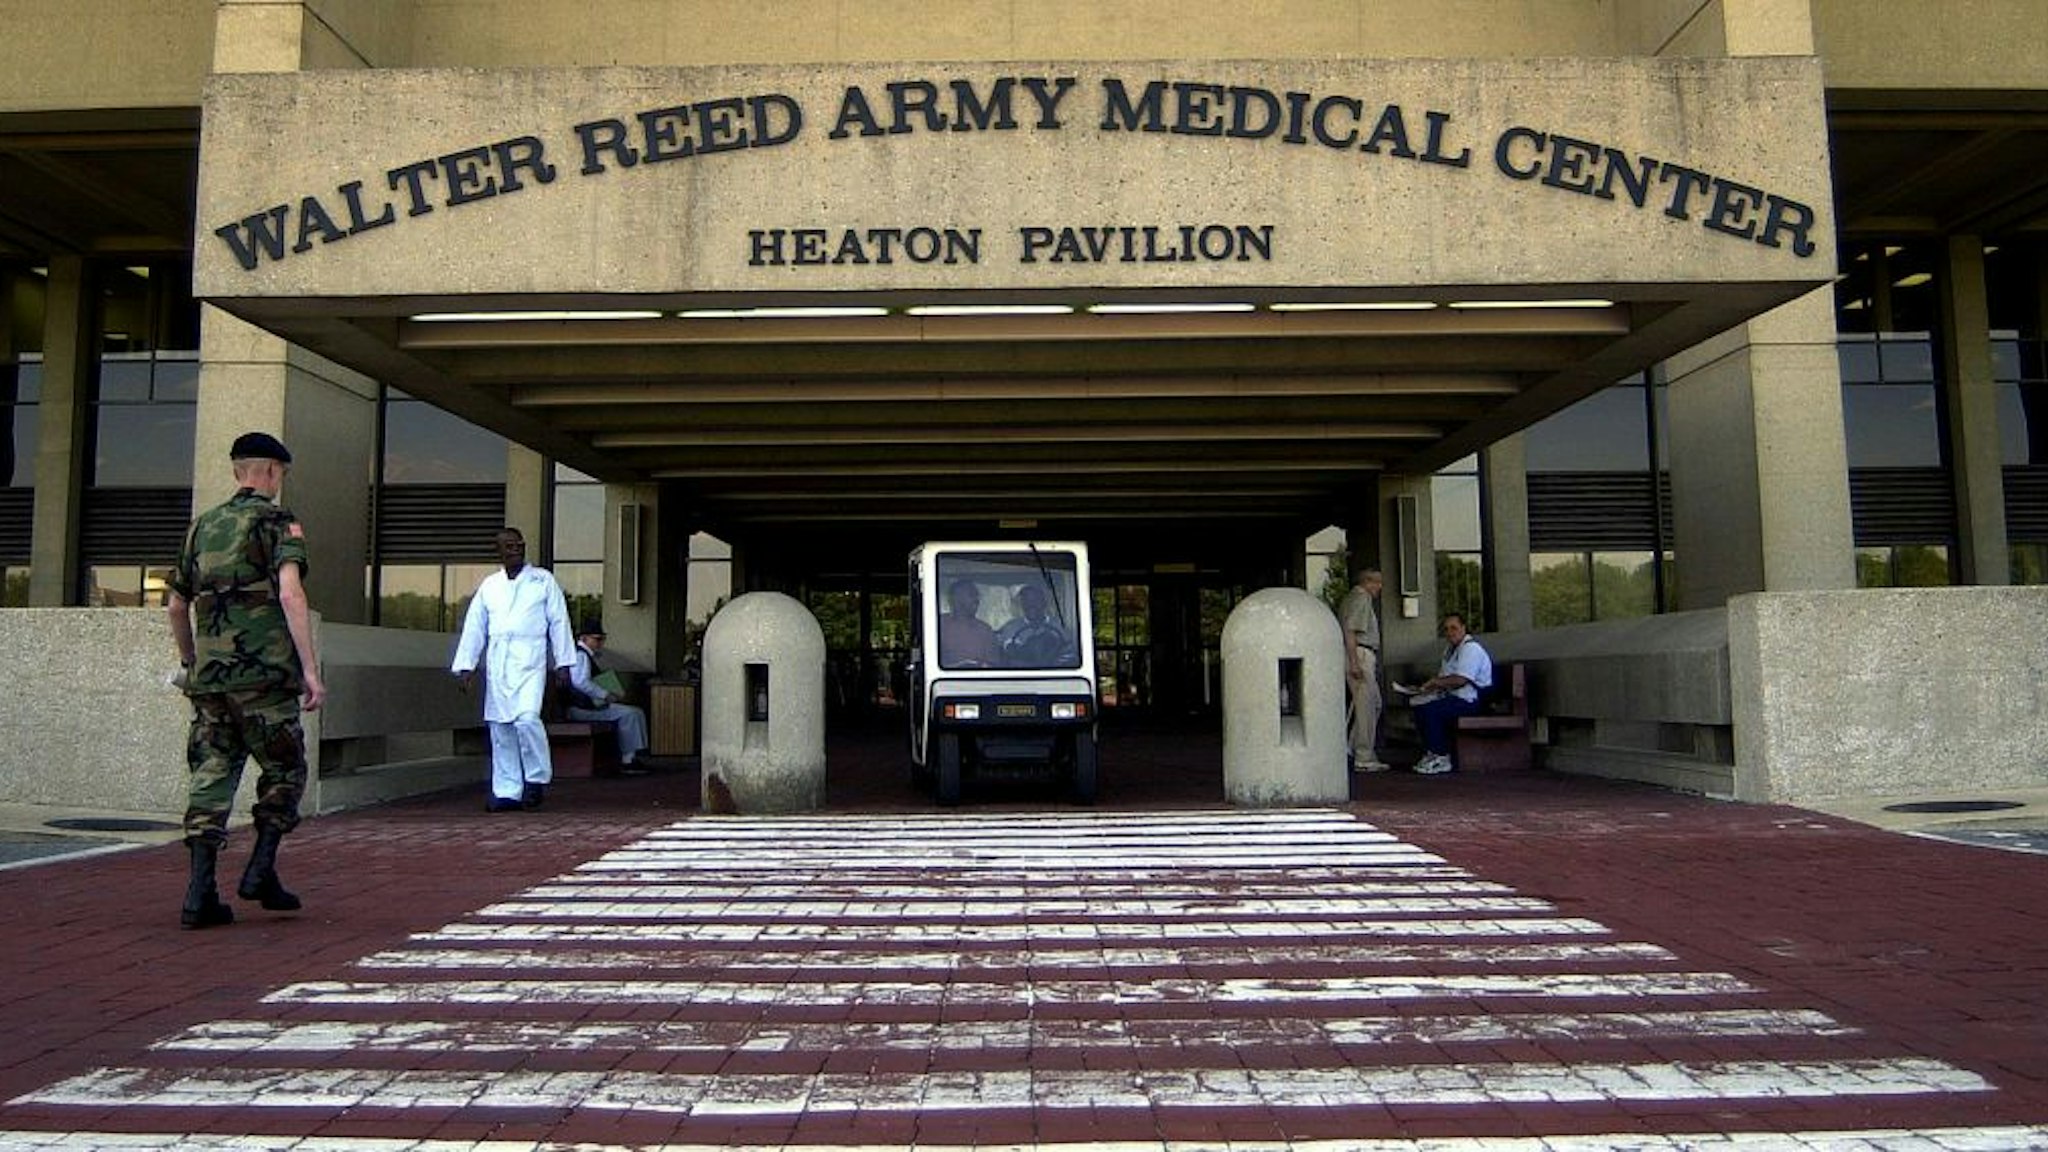 This photo taken 09 July 2001 shows the main entrance of Walter Reed Army Medical Center in Washington, DC.